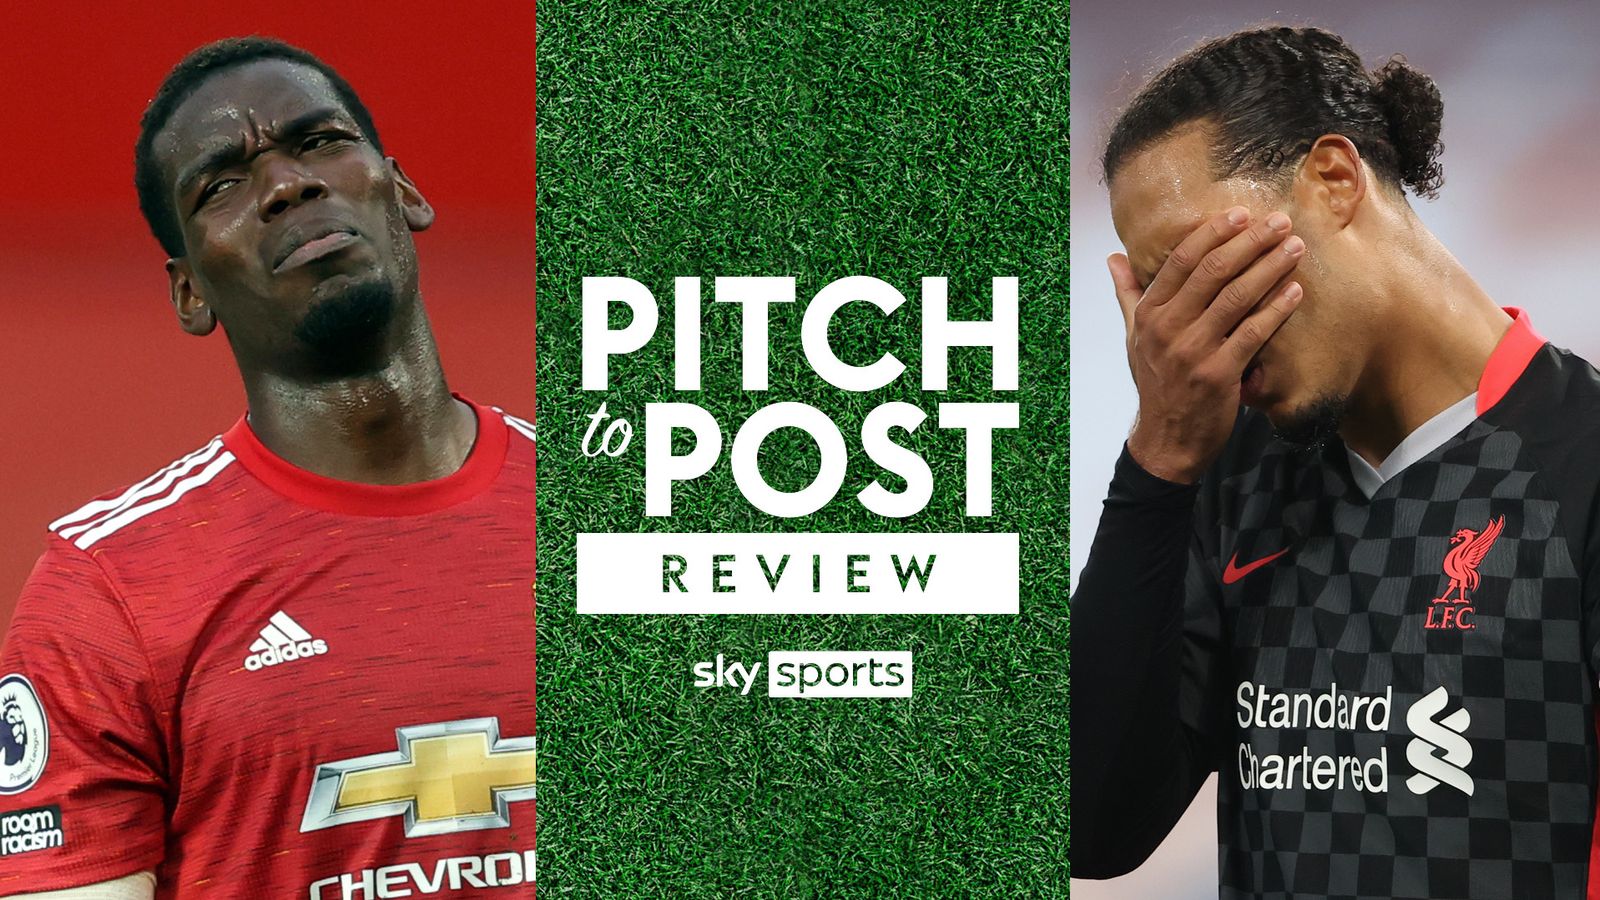 liverpool-and-man-utds-humiliation-on-silly-sunday-explained-on-pitch-to-post-review-podcast